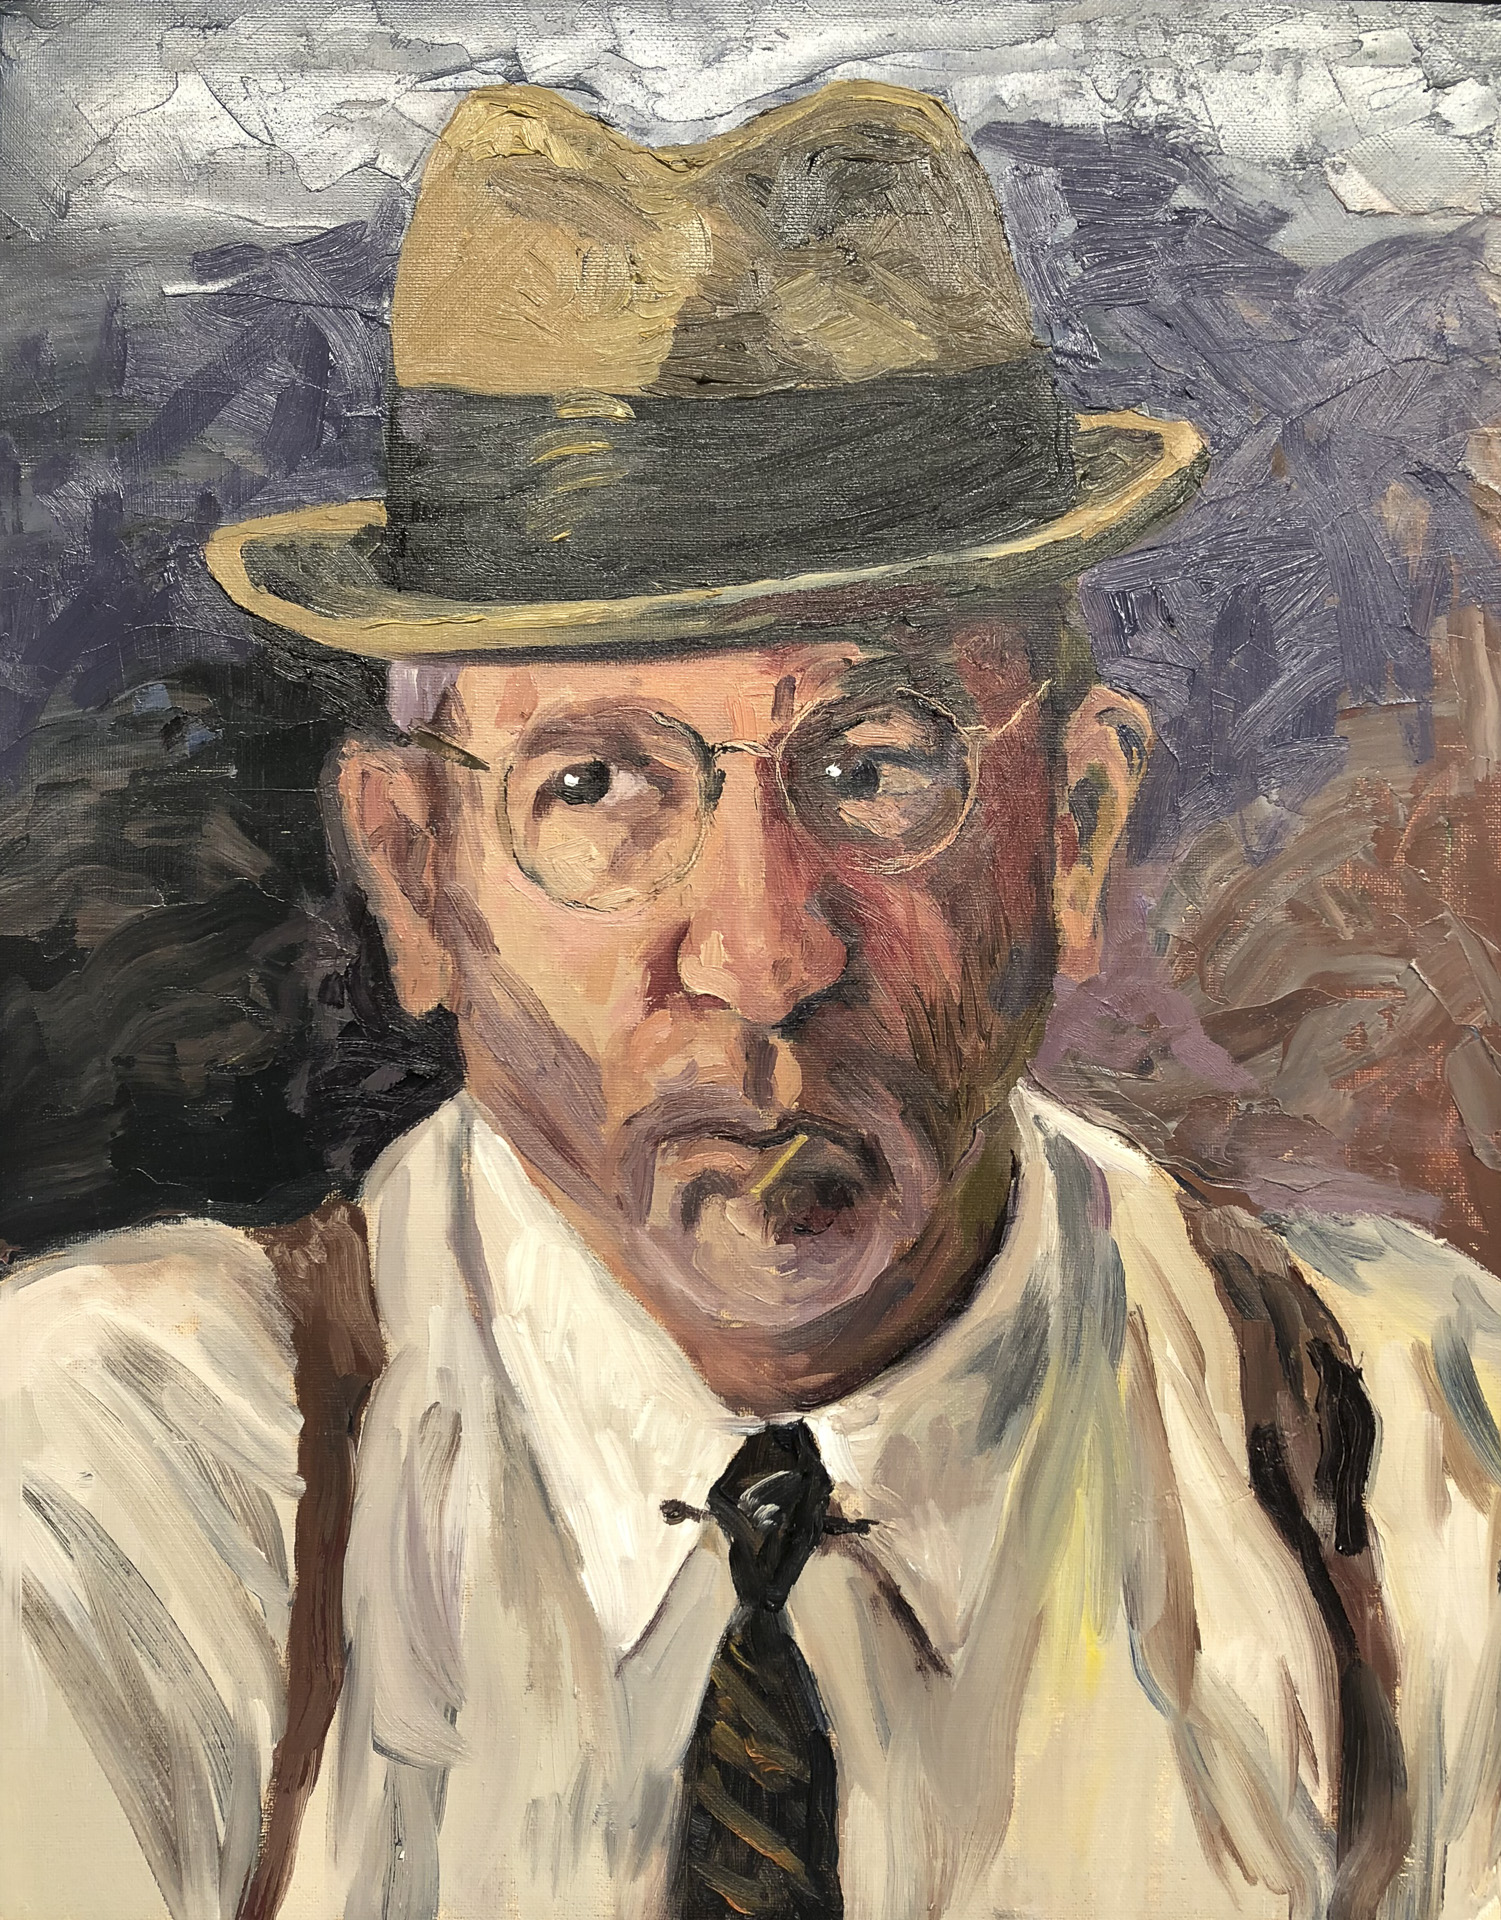 Oil painting of a 1940's gangster wearing round glasses, a hat, white shirt with black tie and suspenders